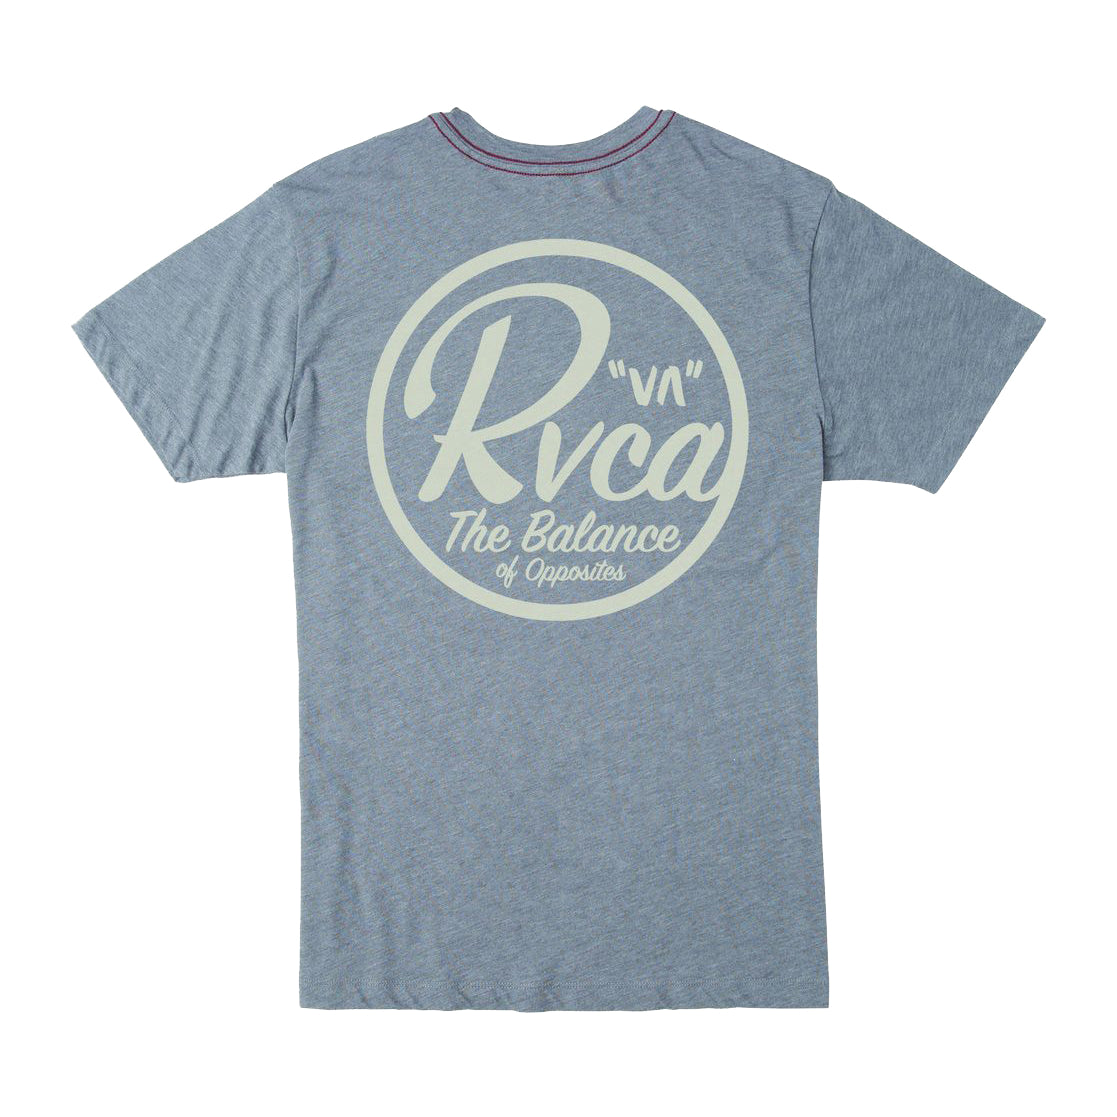 RVCA Patch Seal SS Tee SMK S